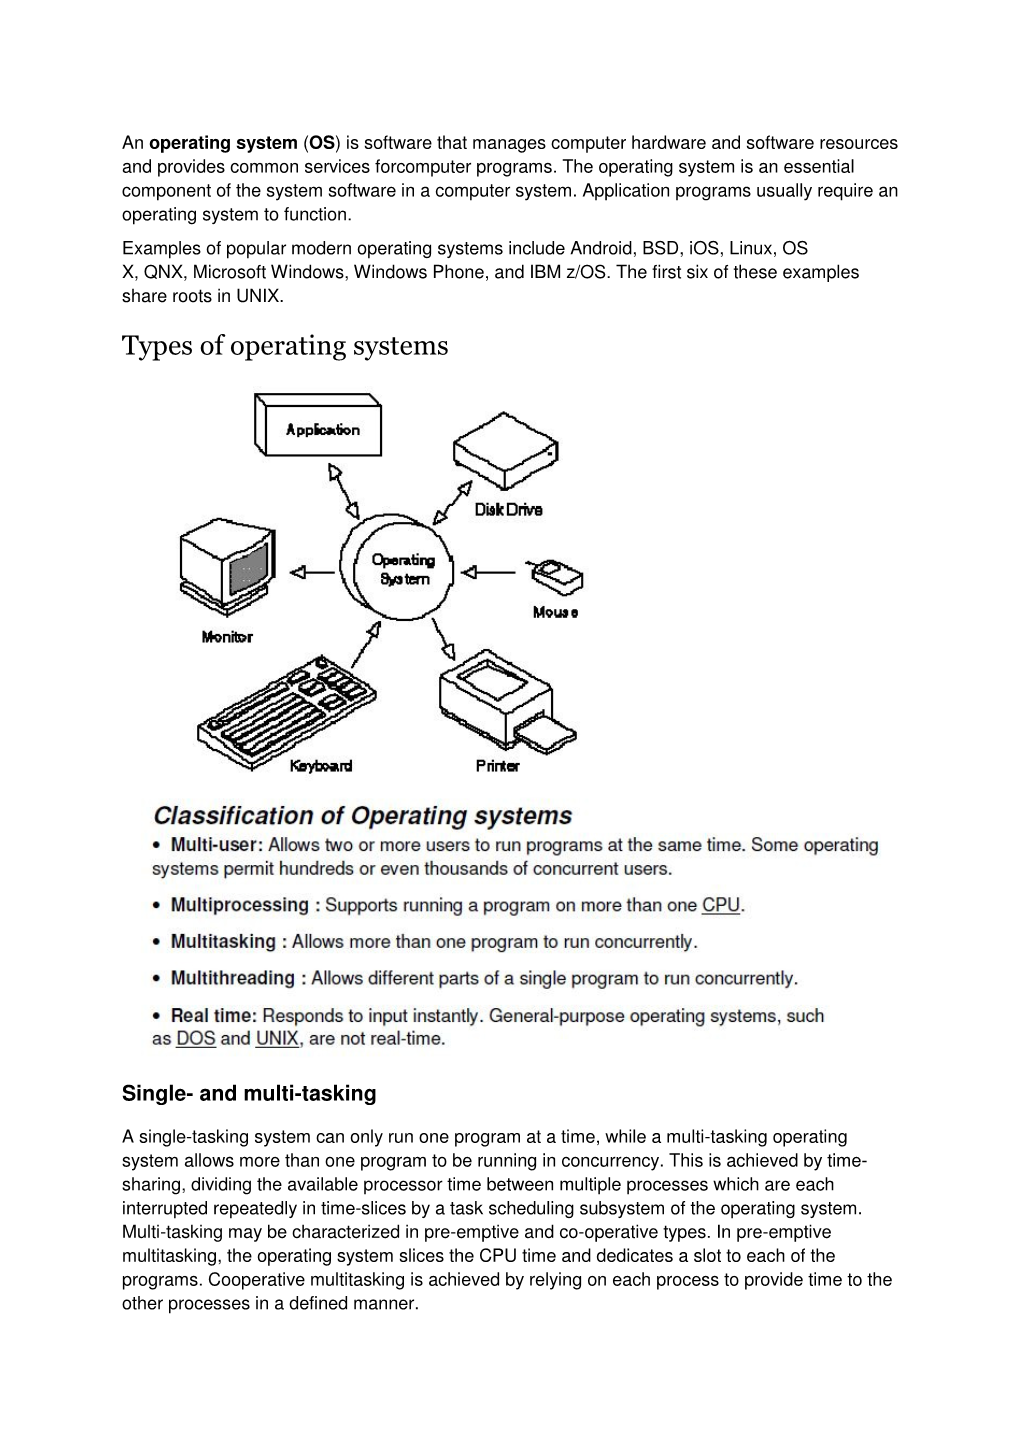 Types of Operating Systems